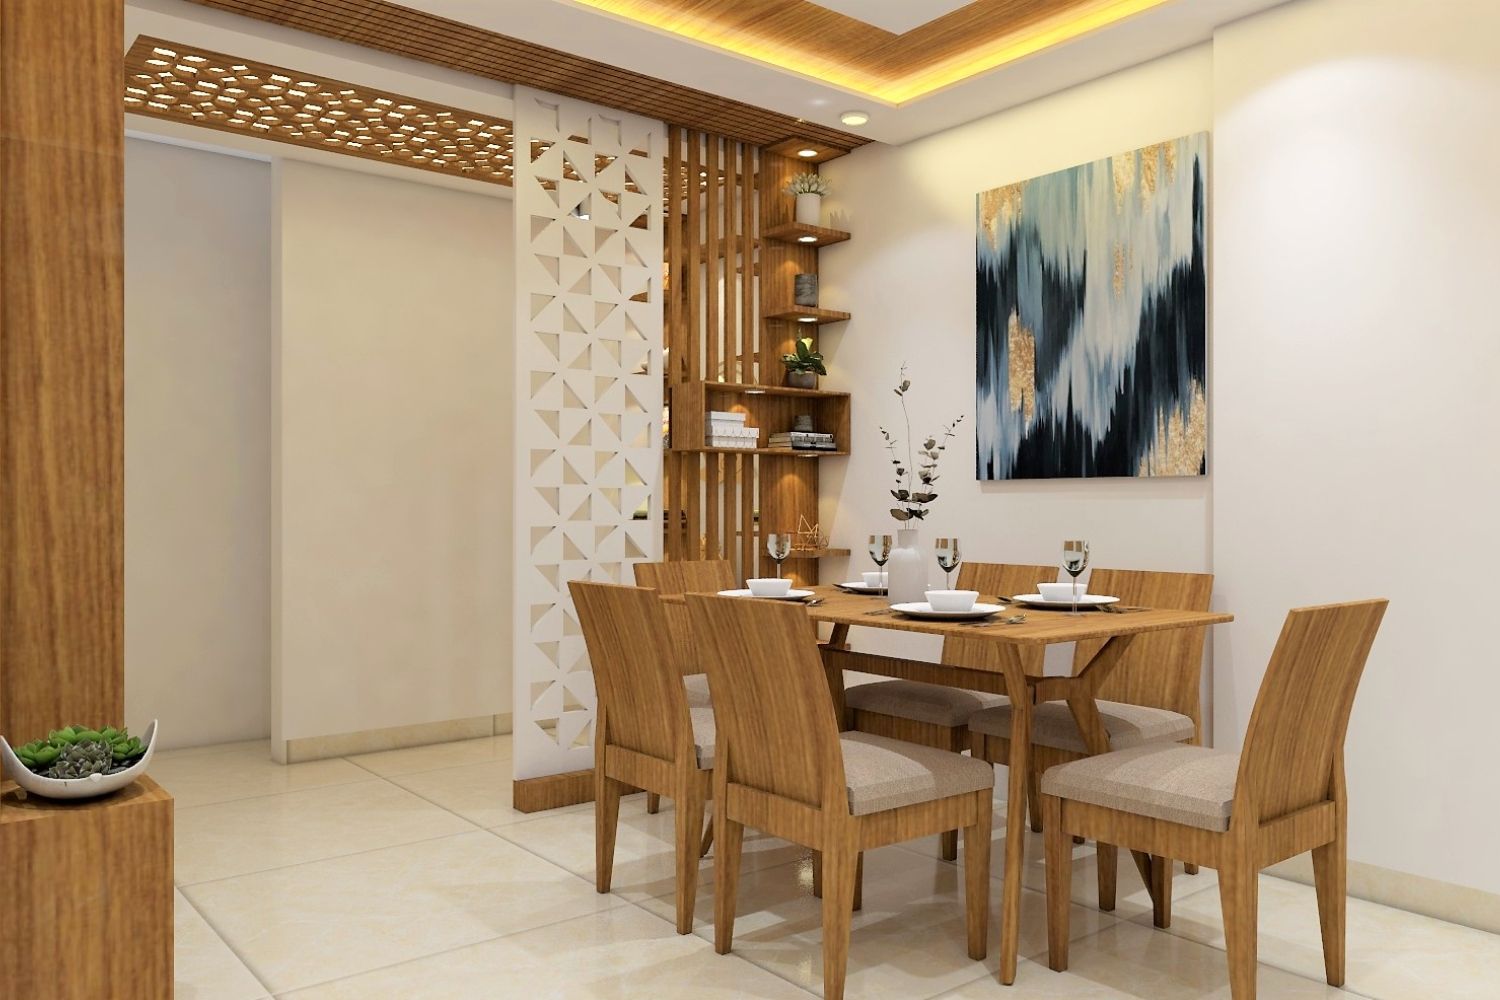 Modern 6-Seater Wood And Beige Dining Room Design With Open Shelves